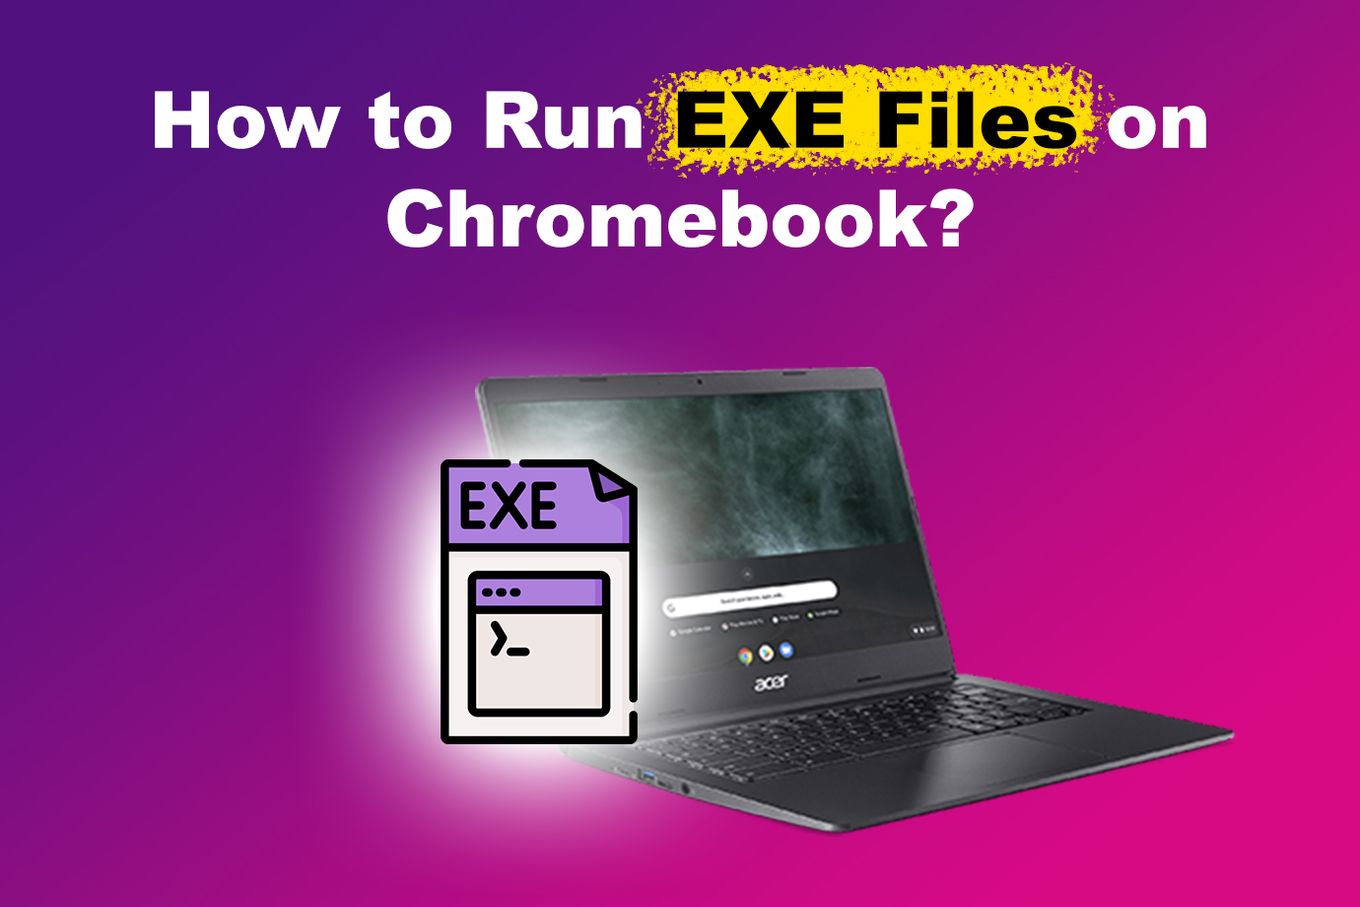 Trying to run an EXE file directly on Chromebook without any emulator or software.
Assuming all EXE files are compatible with Chromebook, which is not true as Chromebook uses a different operating system.